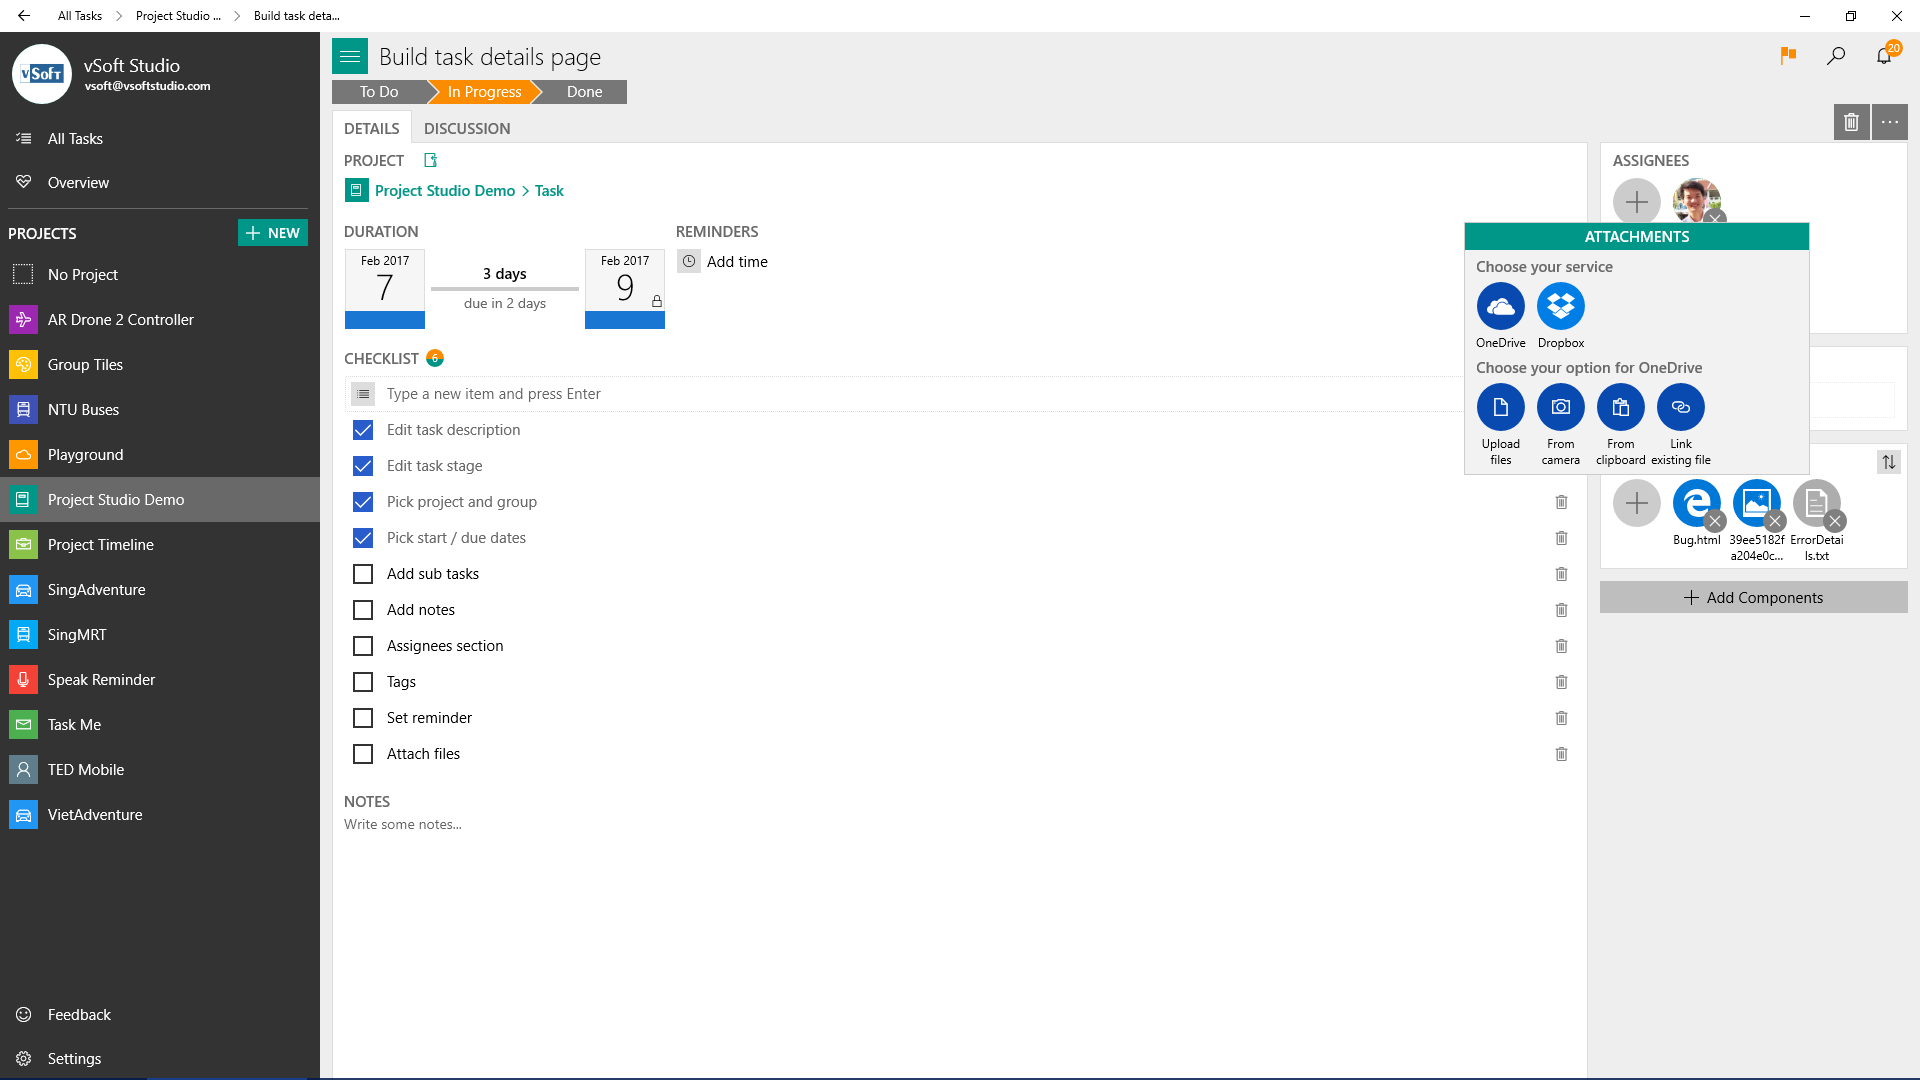 Add attachments to your tasks from your OneDrive or Dropbox